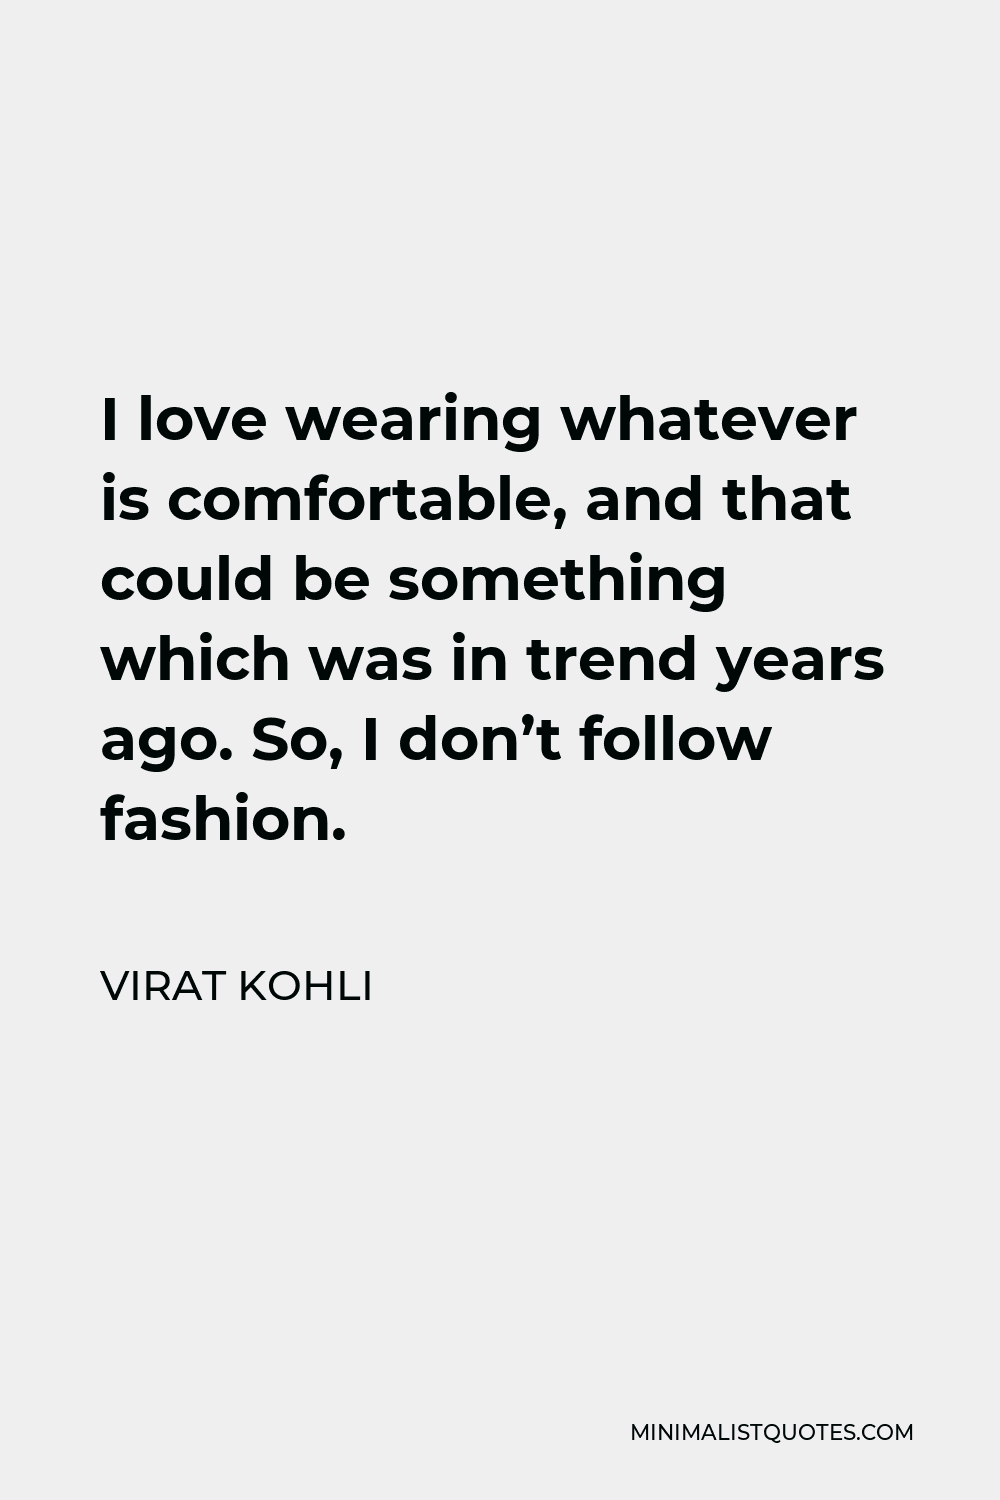 Virat Kohli Quote - I love wearing whatever is comfortable, and that could be something which was in trend years ago. So, I don’t follow fashion.